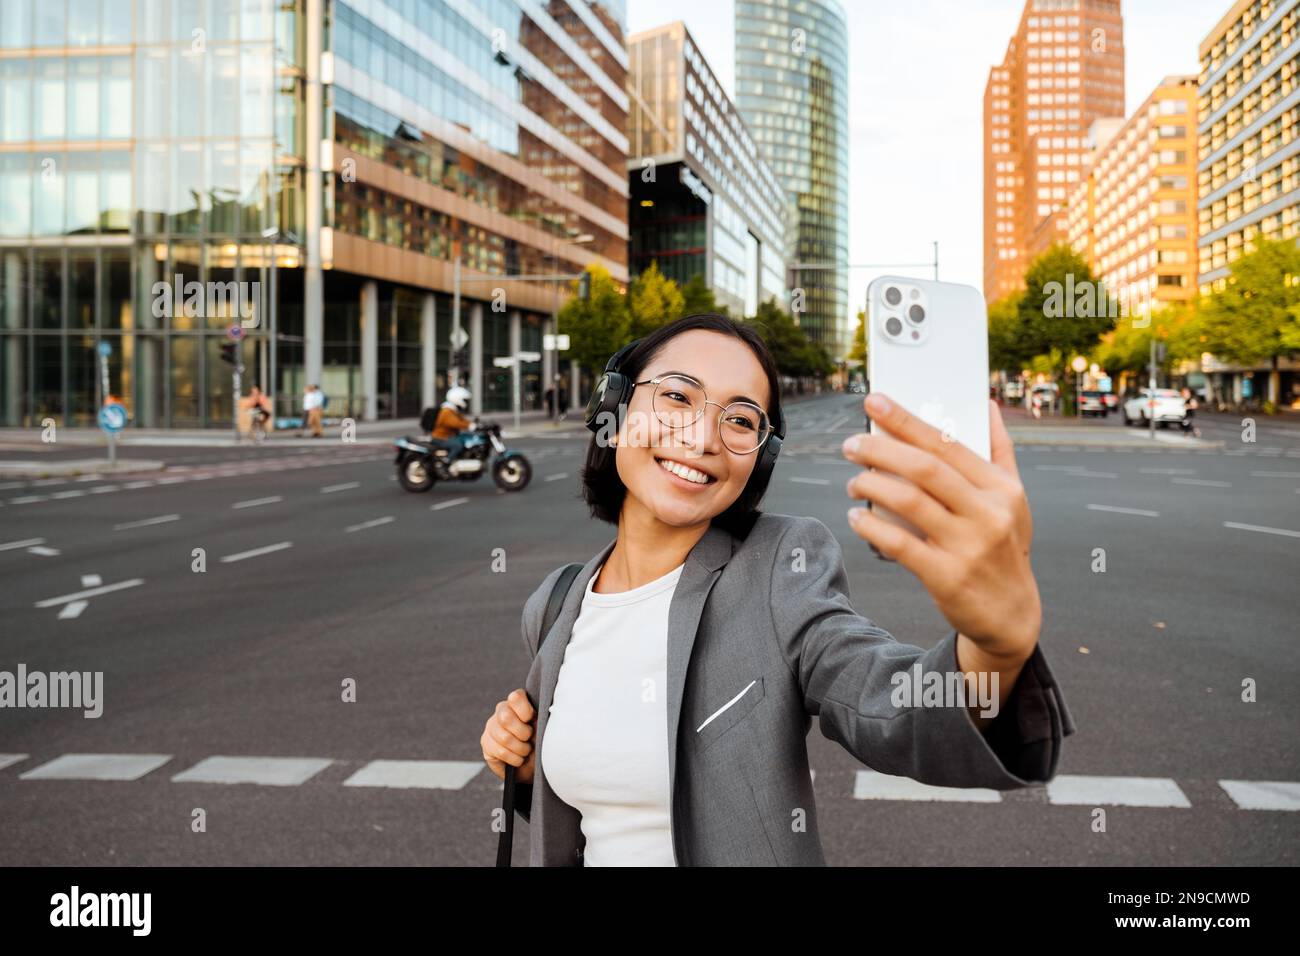 Young joyful asian woman in headphones taking selfie on smartphone while standing at city street Stock Photo